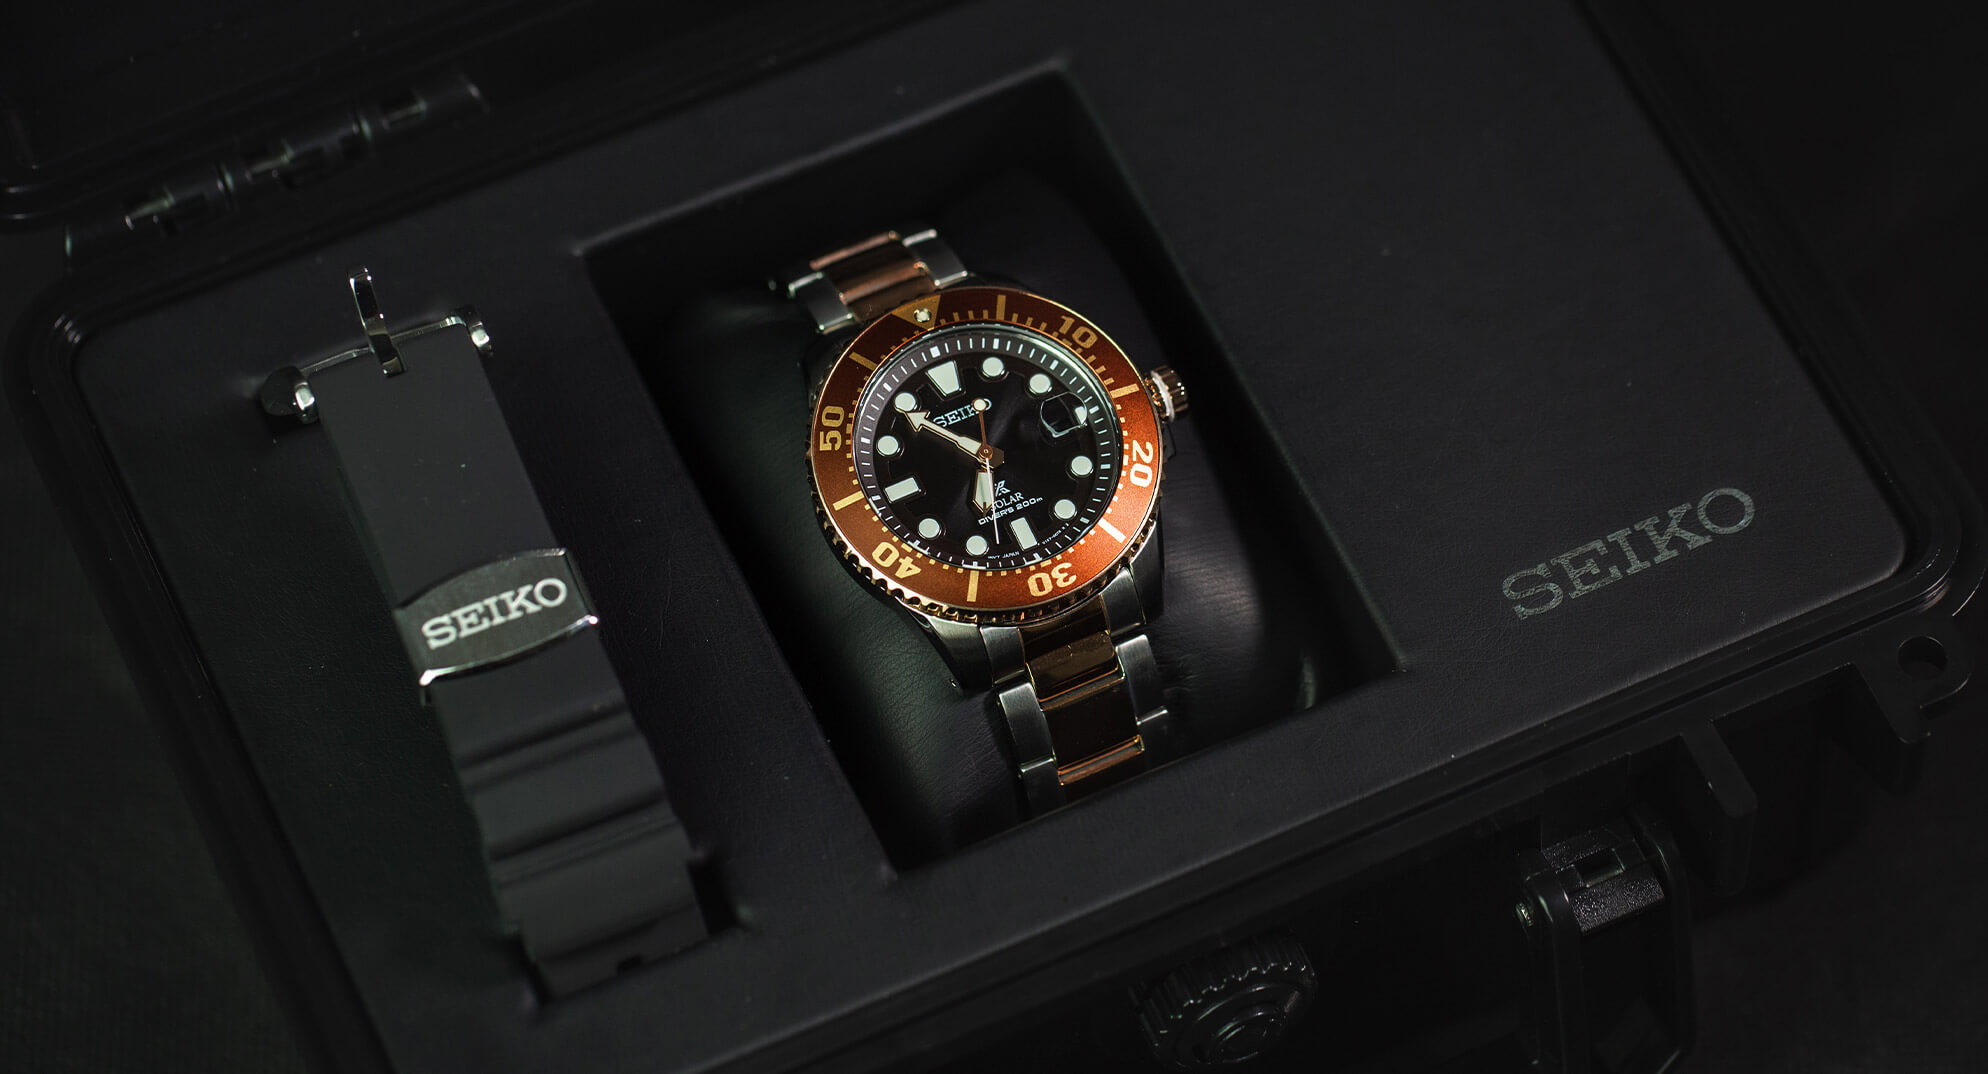 Style & Reliability: The Seiko 'Root Beer' Limited Edition SNE566P